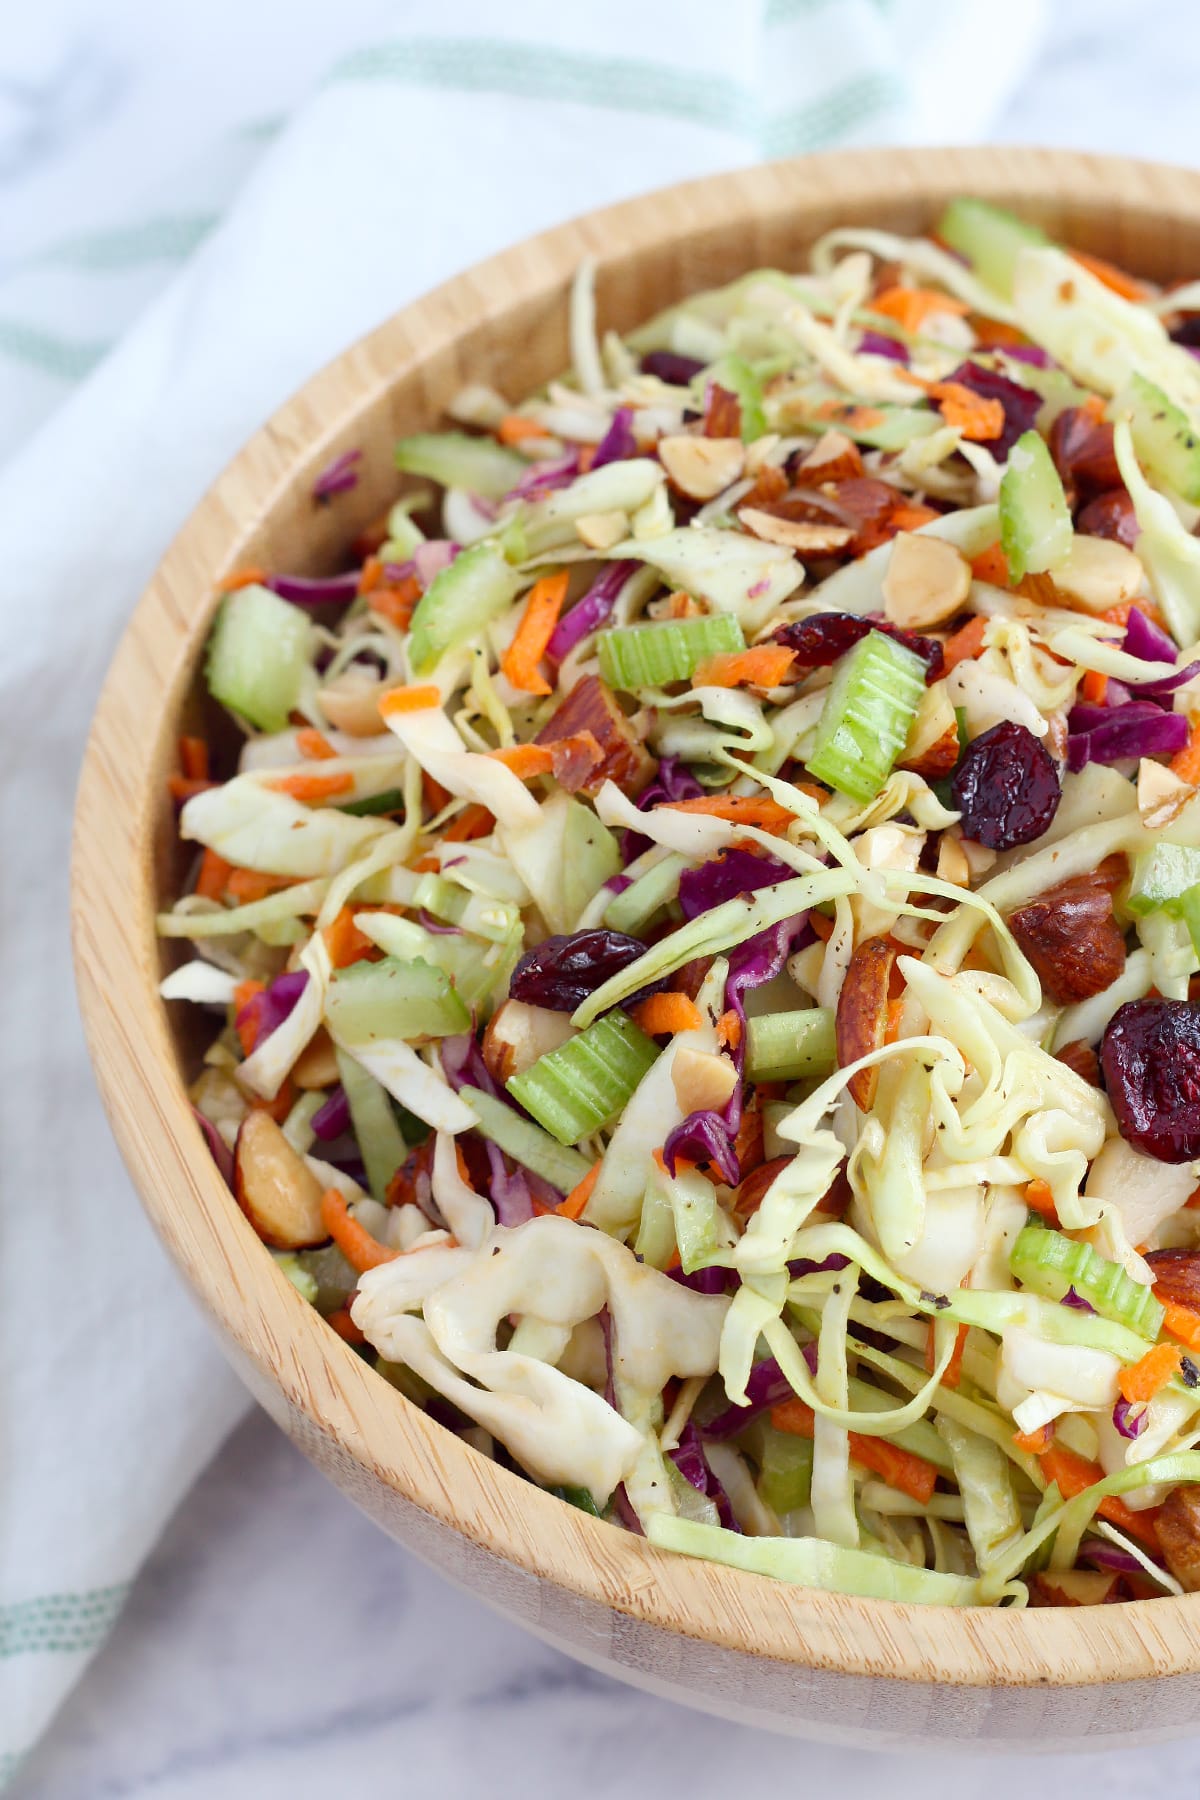 Homemade coleslaw with celery and dried cranberries in a wooden serving bowl.